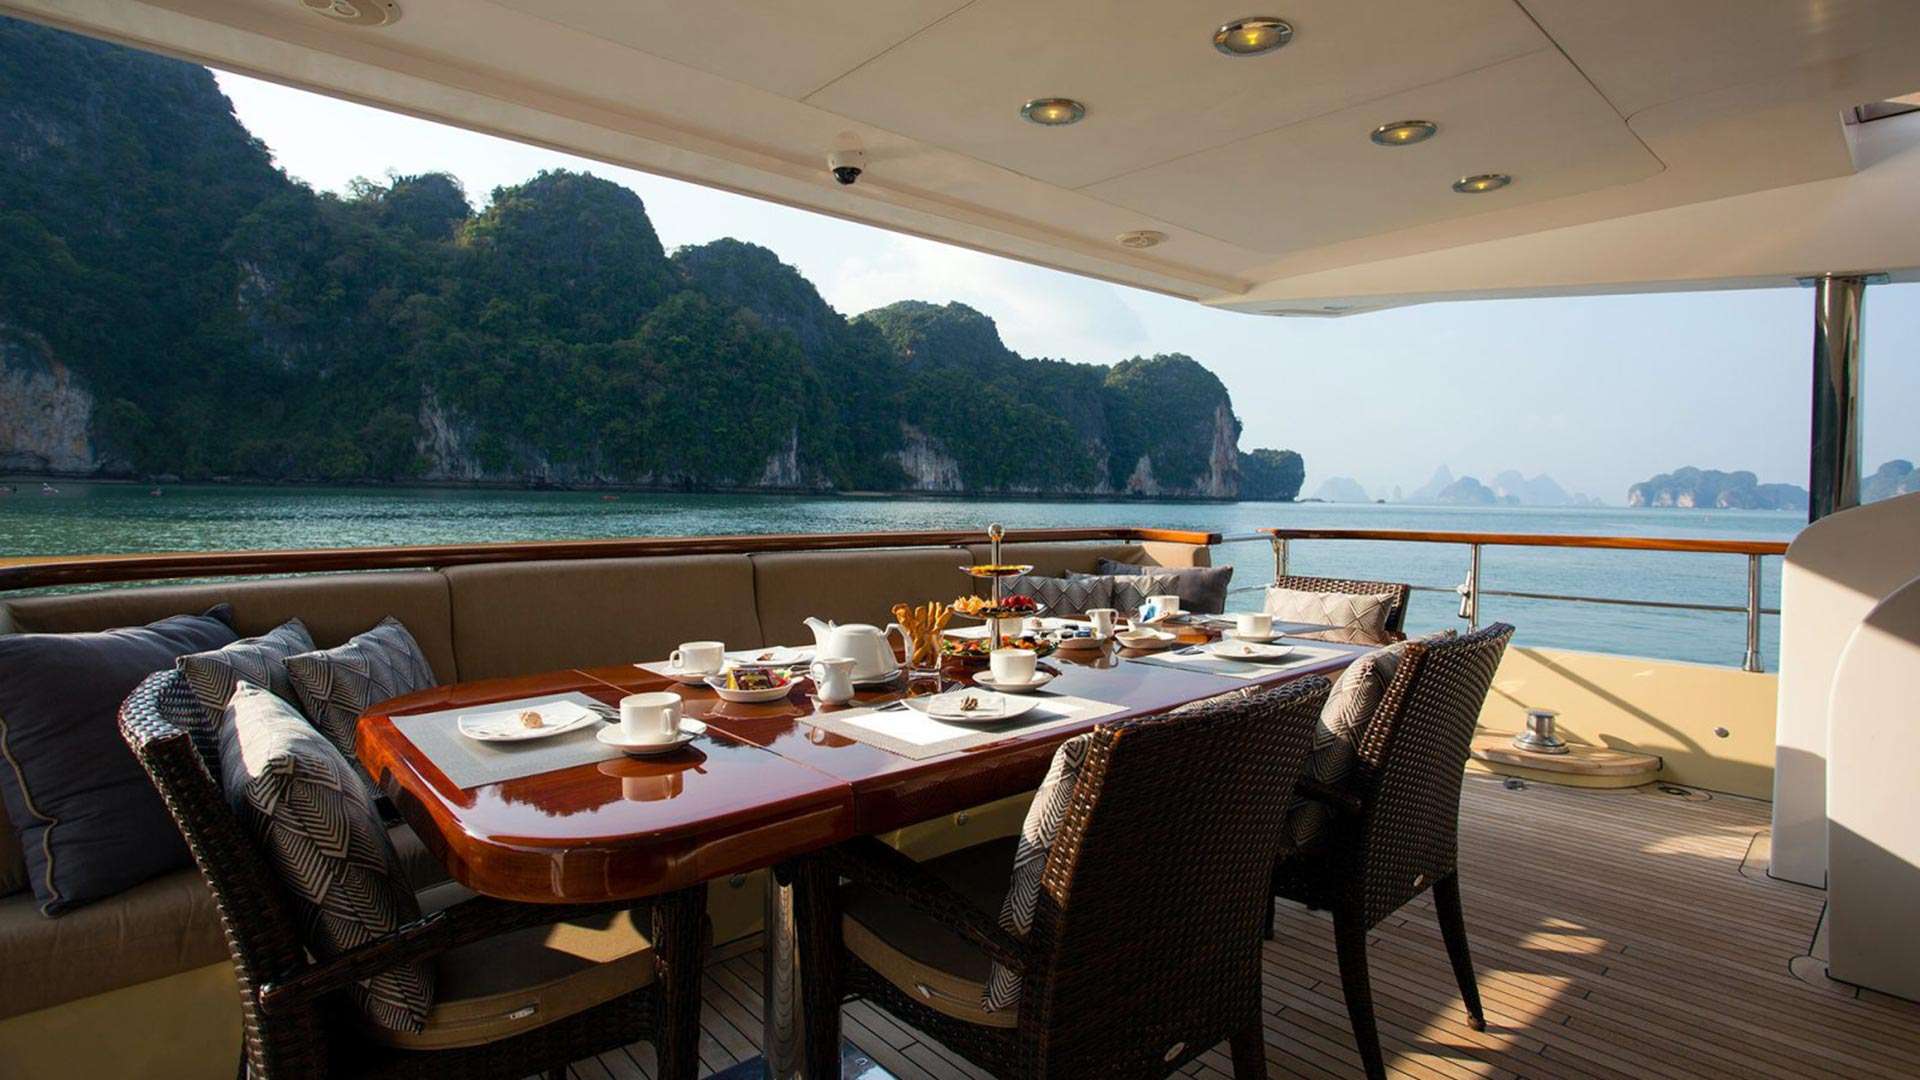 Mia Kai  - Yacht Charter Thailand & Boat hire in Indian Ocean & SE Asia 4